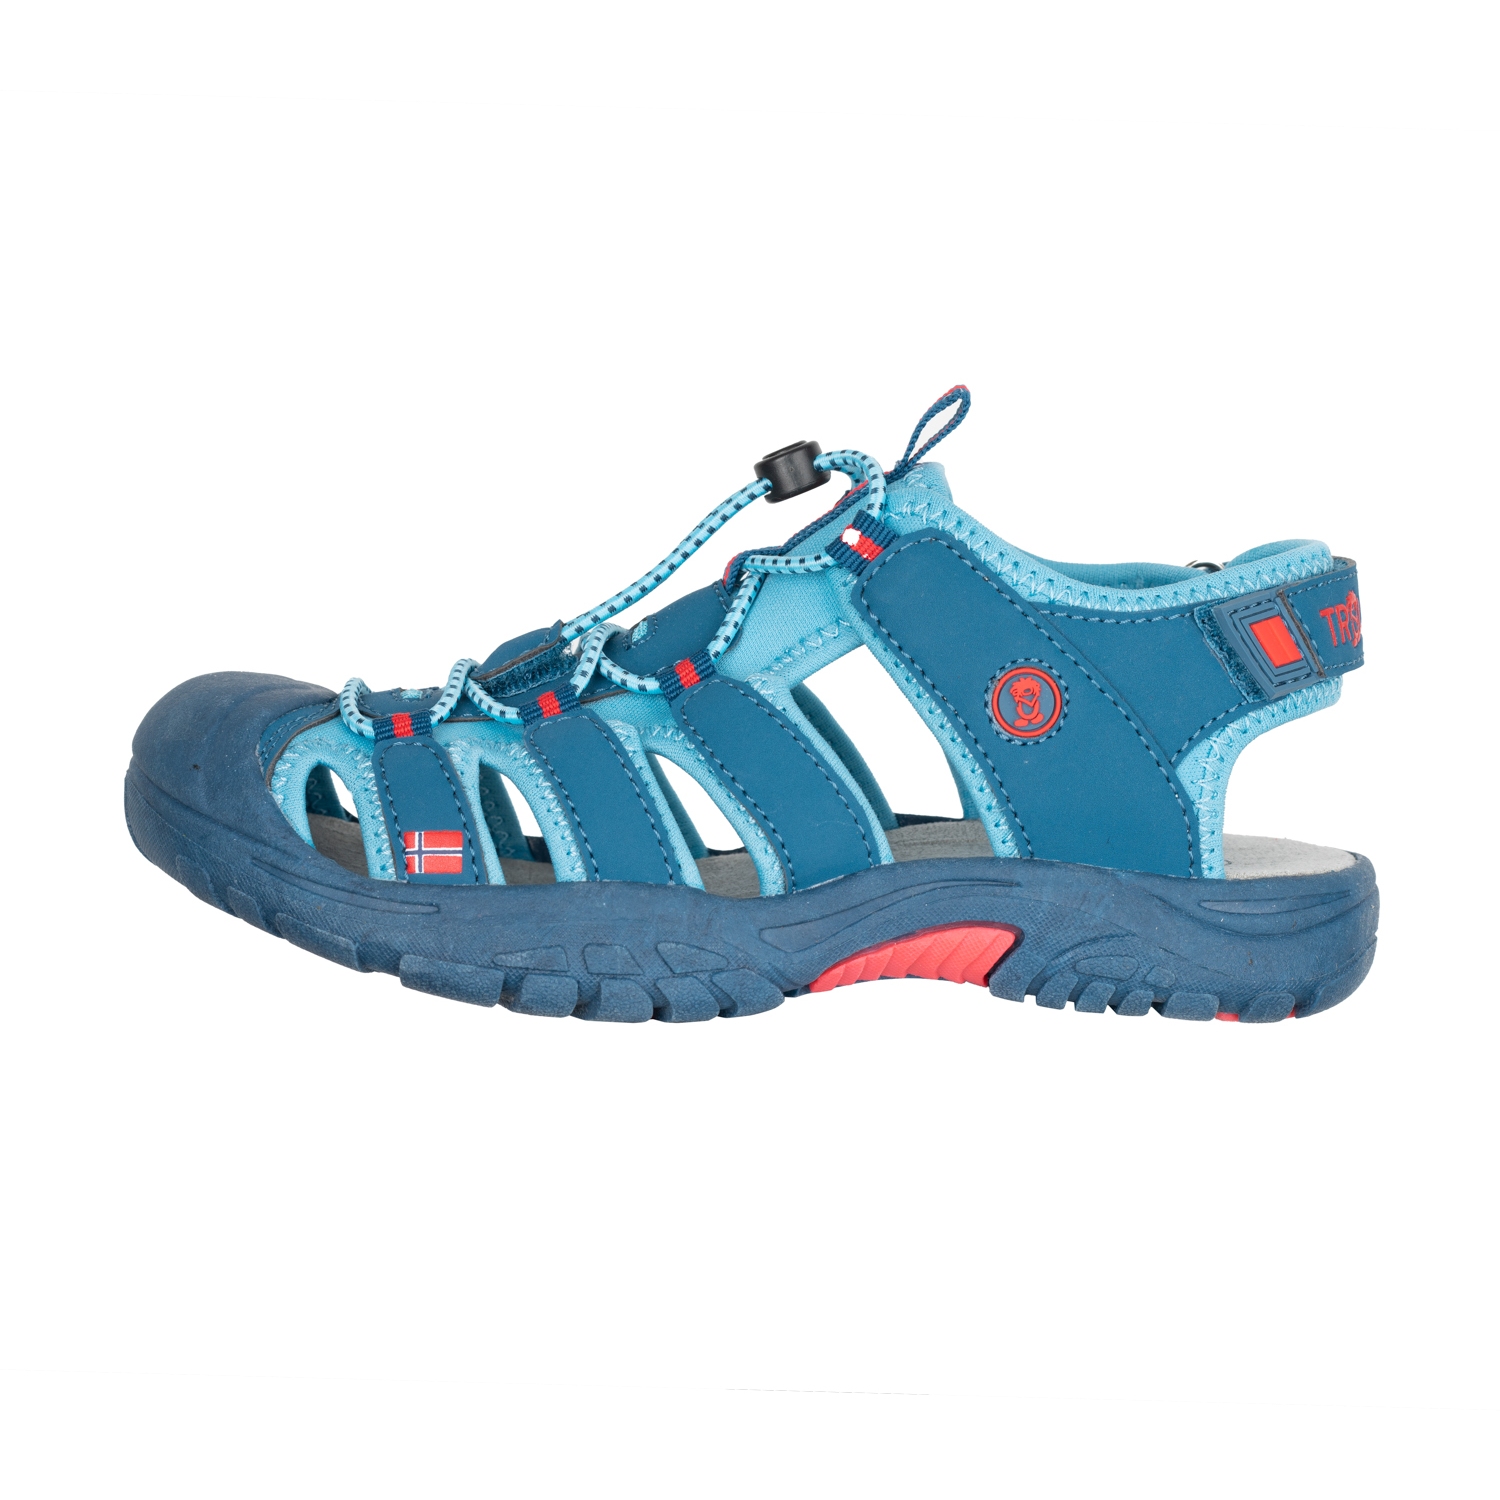 Picture of Trollkids Kvalvika Kids Sandals - dolphin blue/spicy red